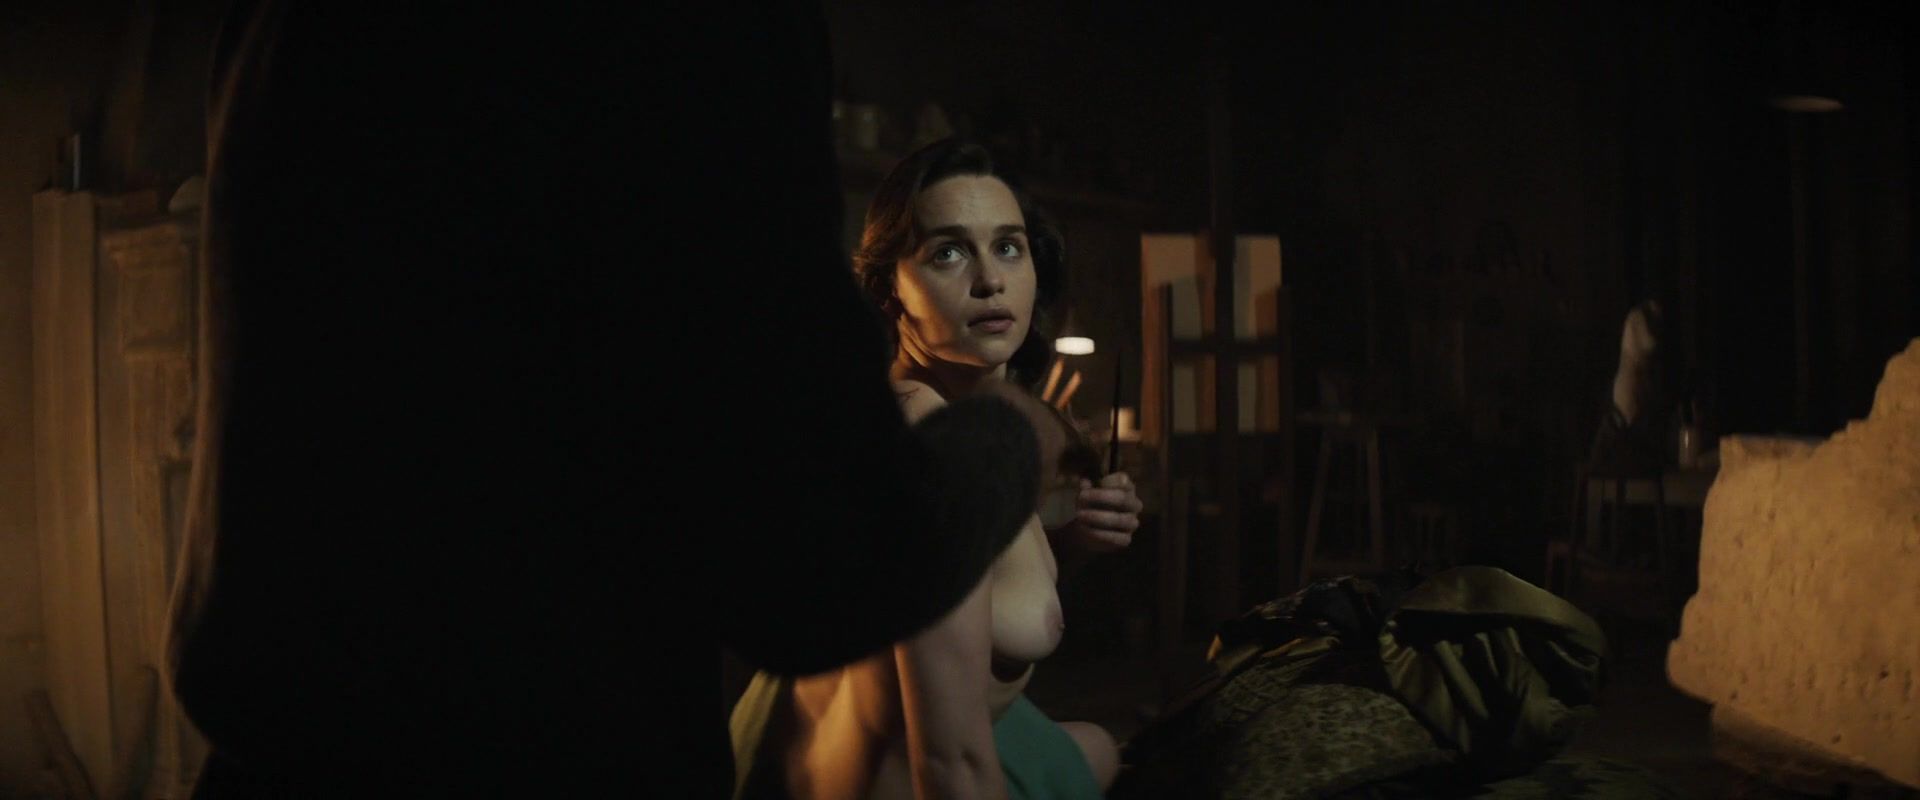 RealGirls Naked Emilia Clarke in topless scene of the movie "Voice from the Stone" | Released in 2017 ComicsPorno - 1